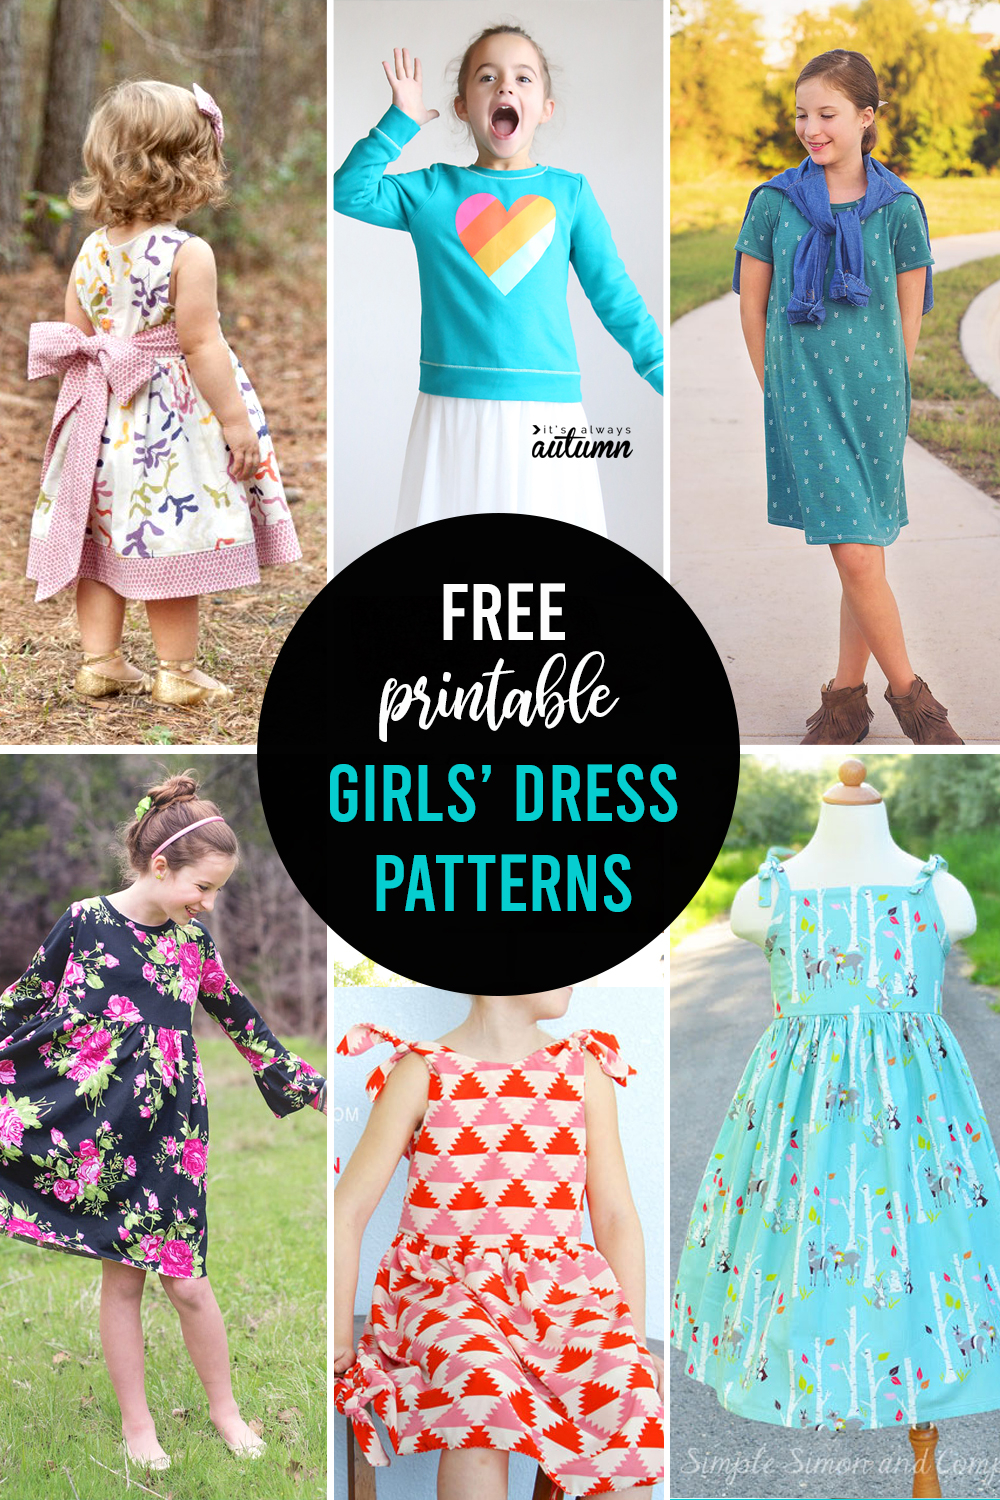 How To Make A Dress 25 Free Dress Patterns For Girls 